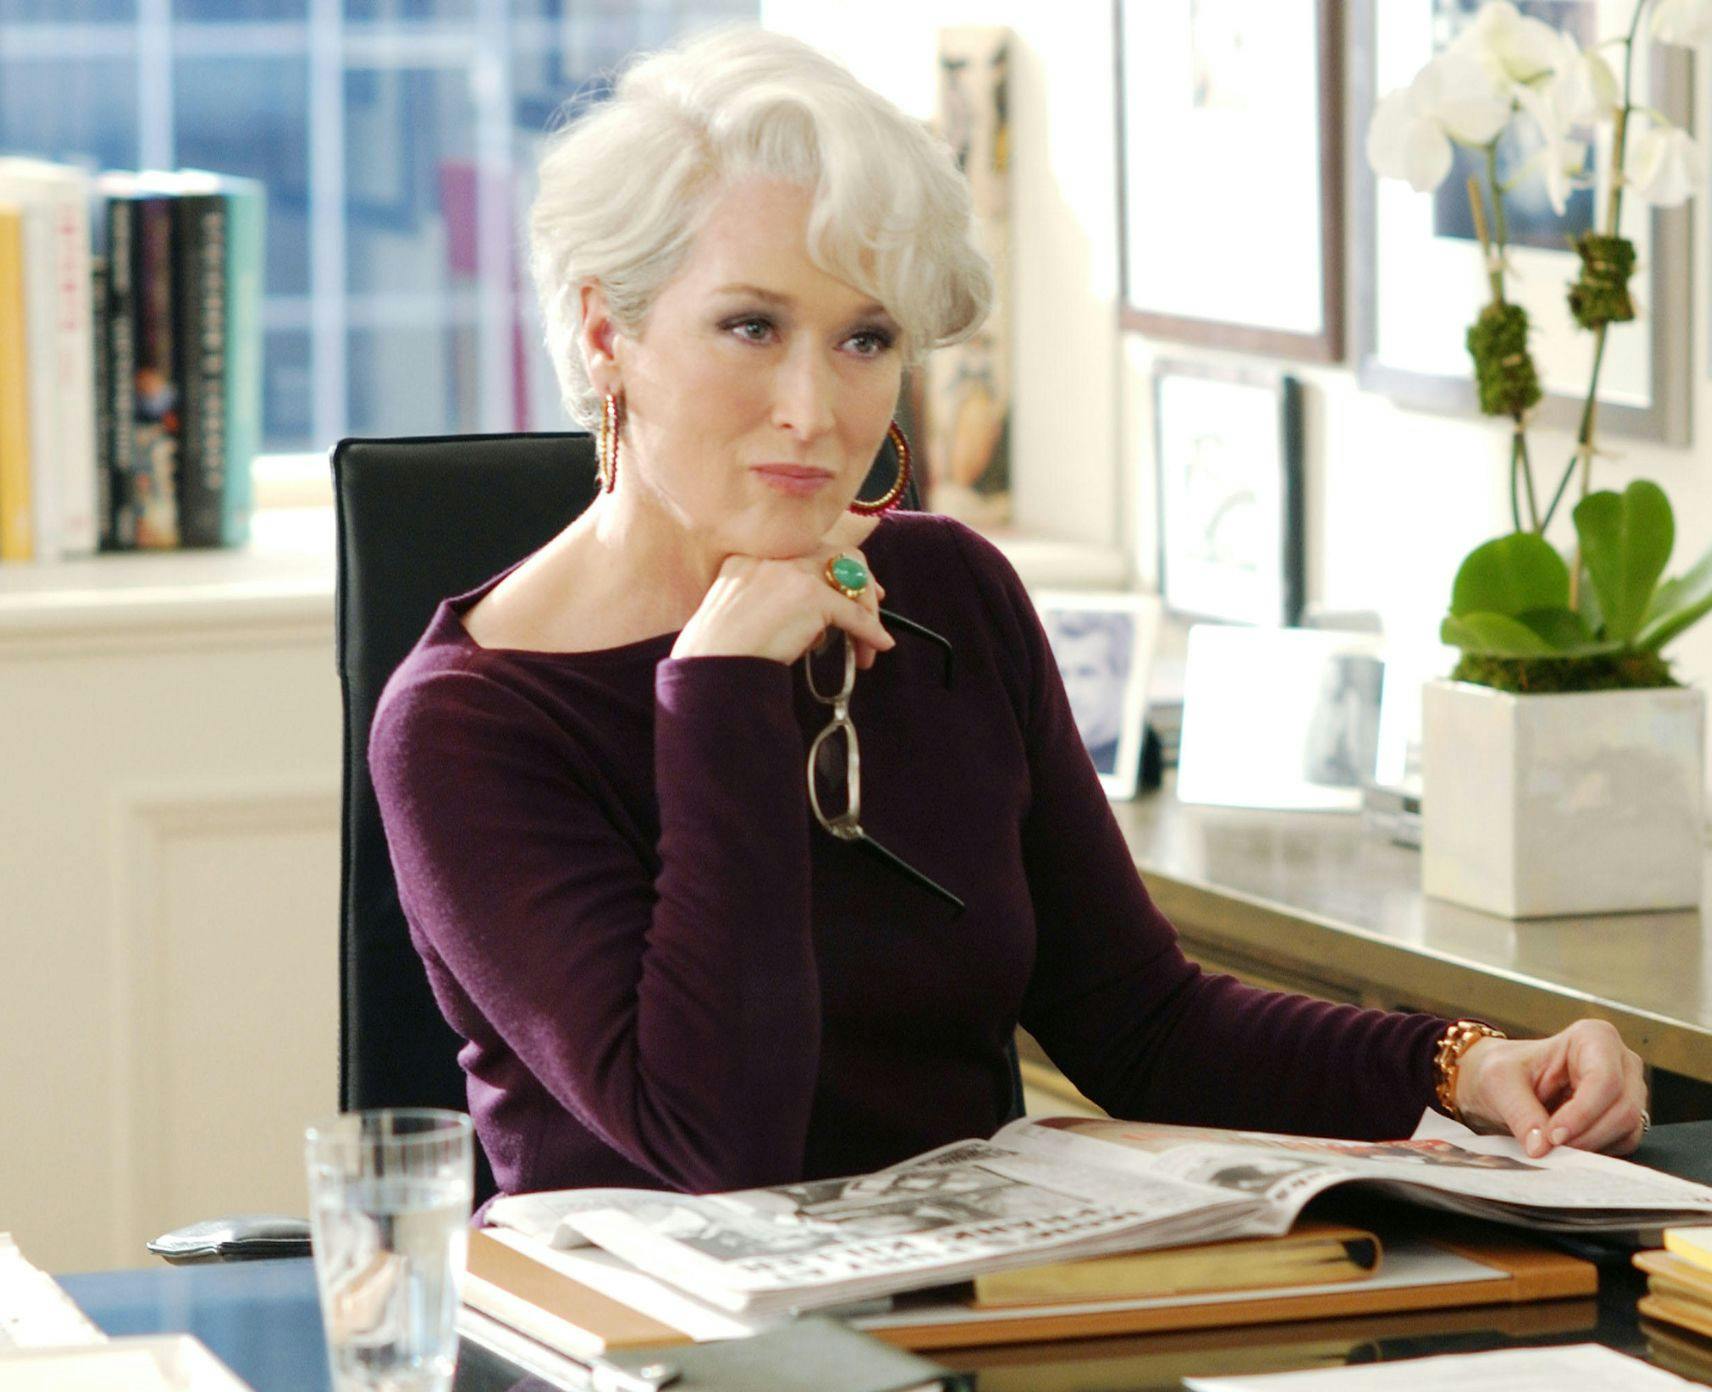 Meryl Streep as Miranda Priestly in the Devil wears Prada. She has a burgundy top on and is sitting at a desk looking unimpressed.